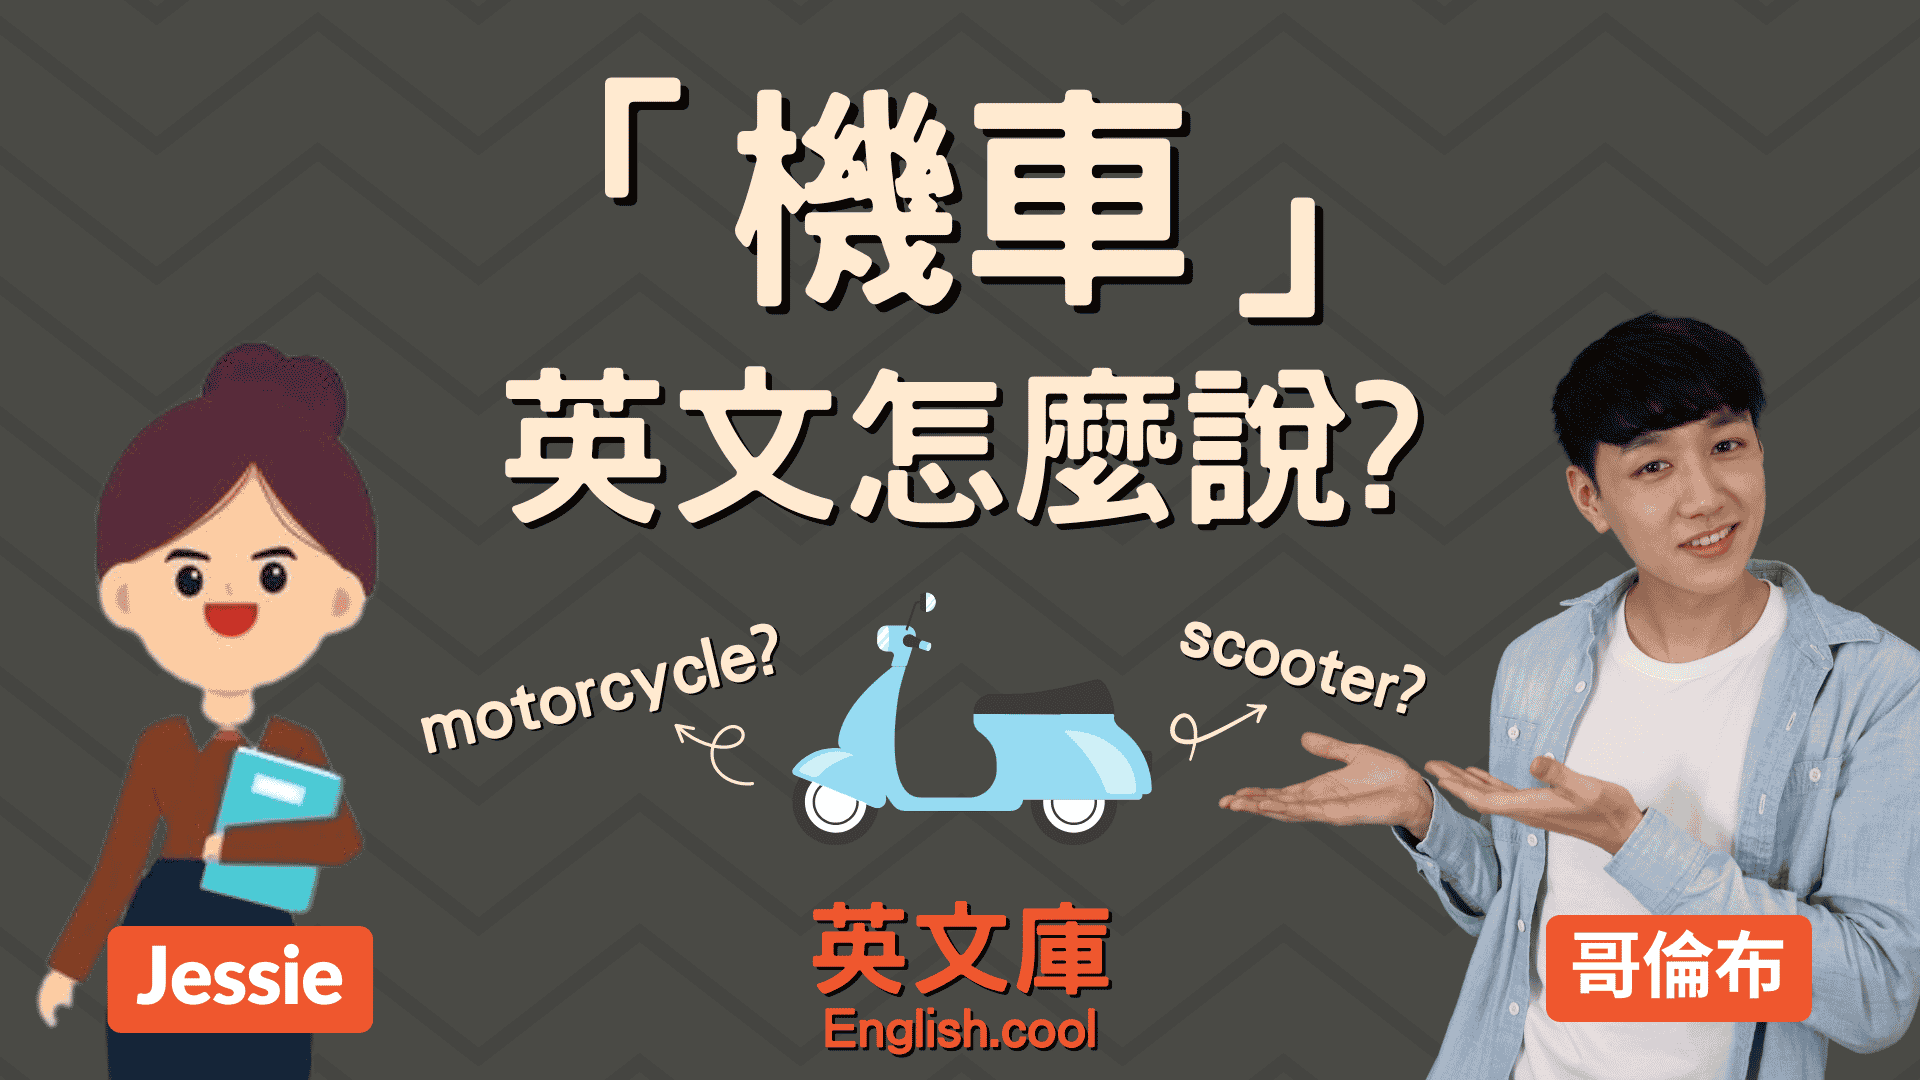 You are currently viewing 「機車」英文怎麼說？scooter 和 motorcycle 差在哪？